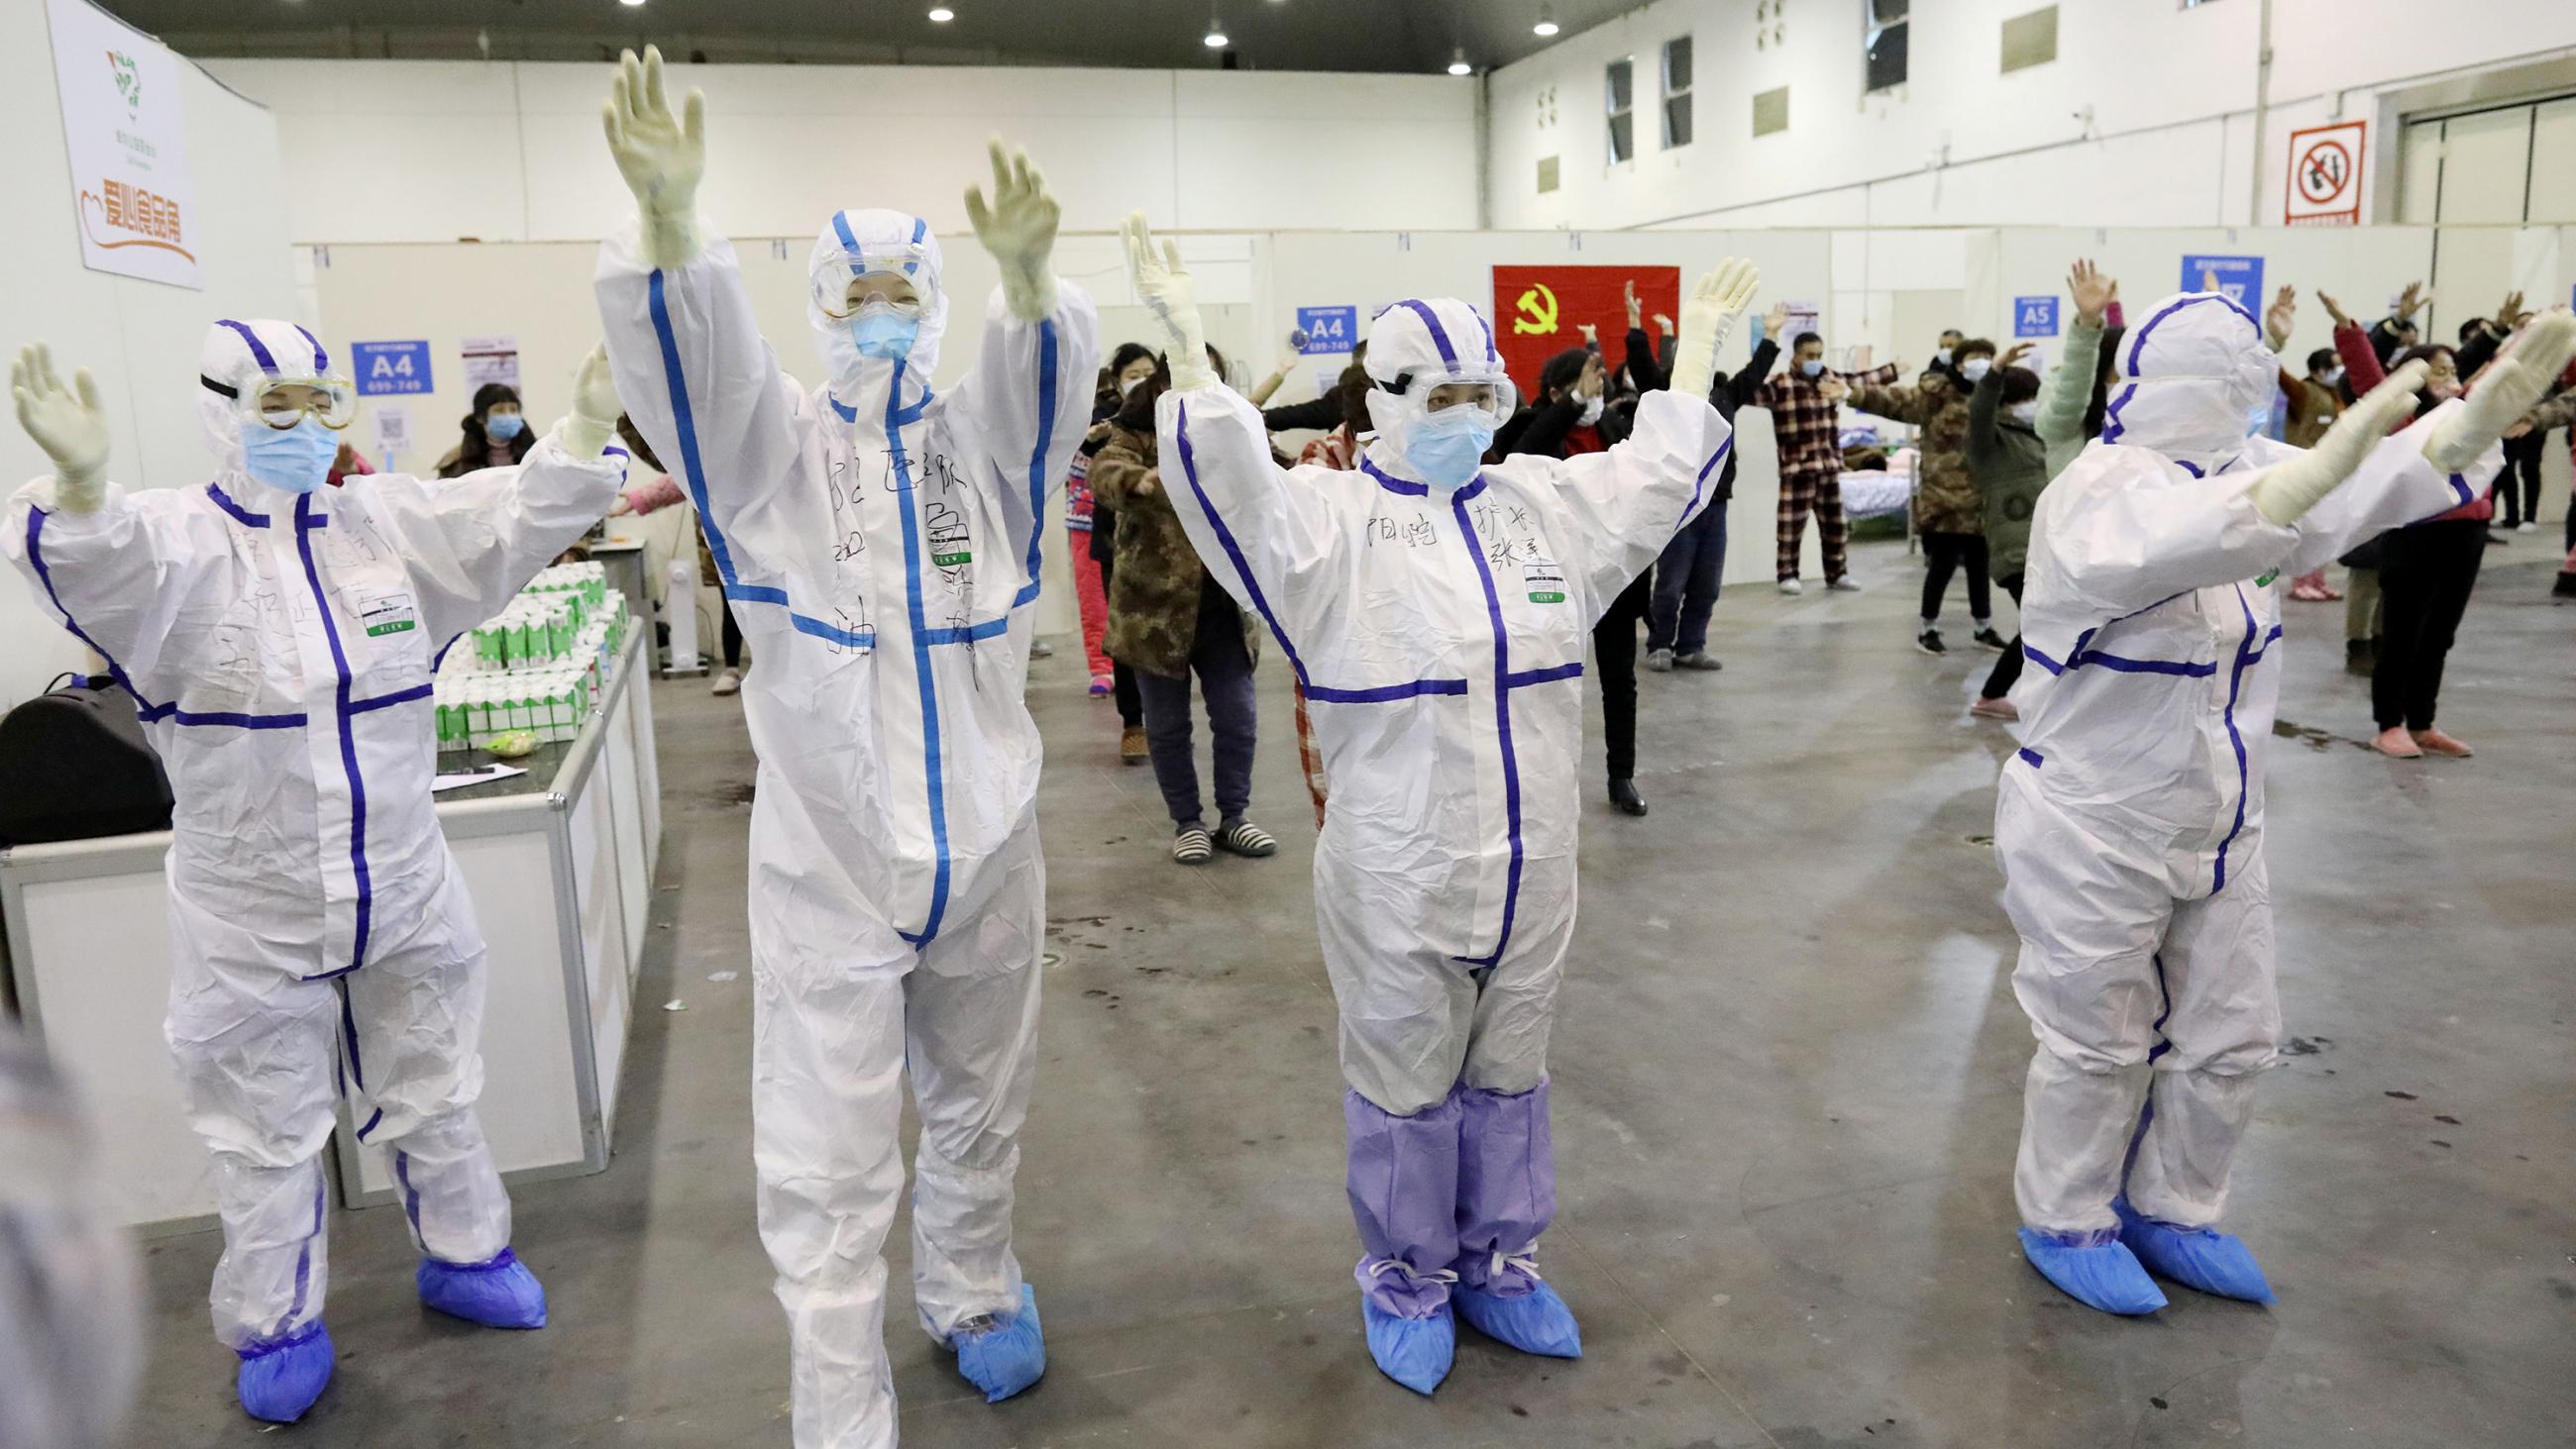 Picture shows a line of health care workers in full protective gear in front of other people who have masks, all with their arms in the air. 